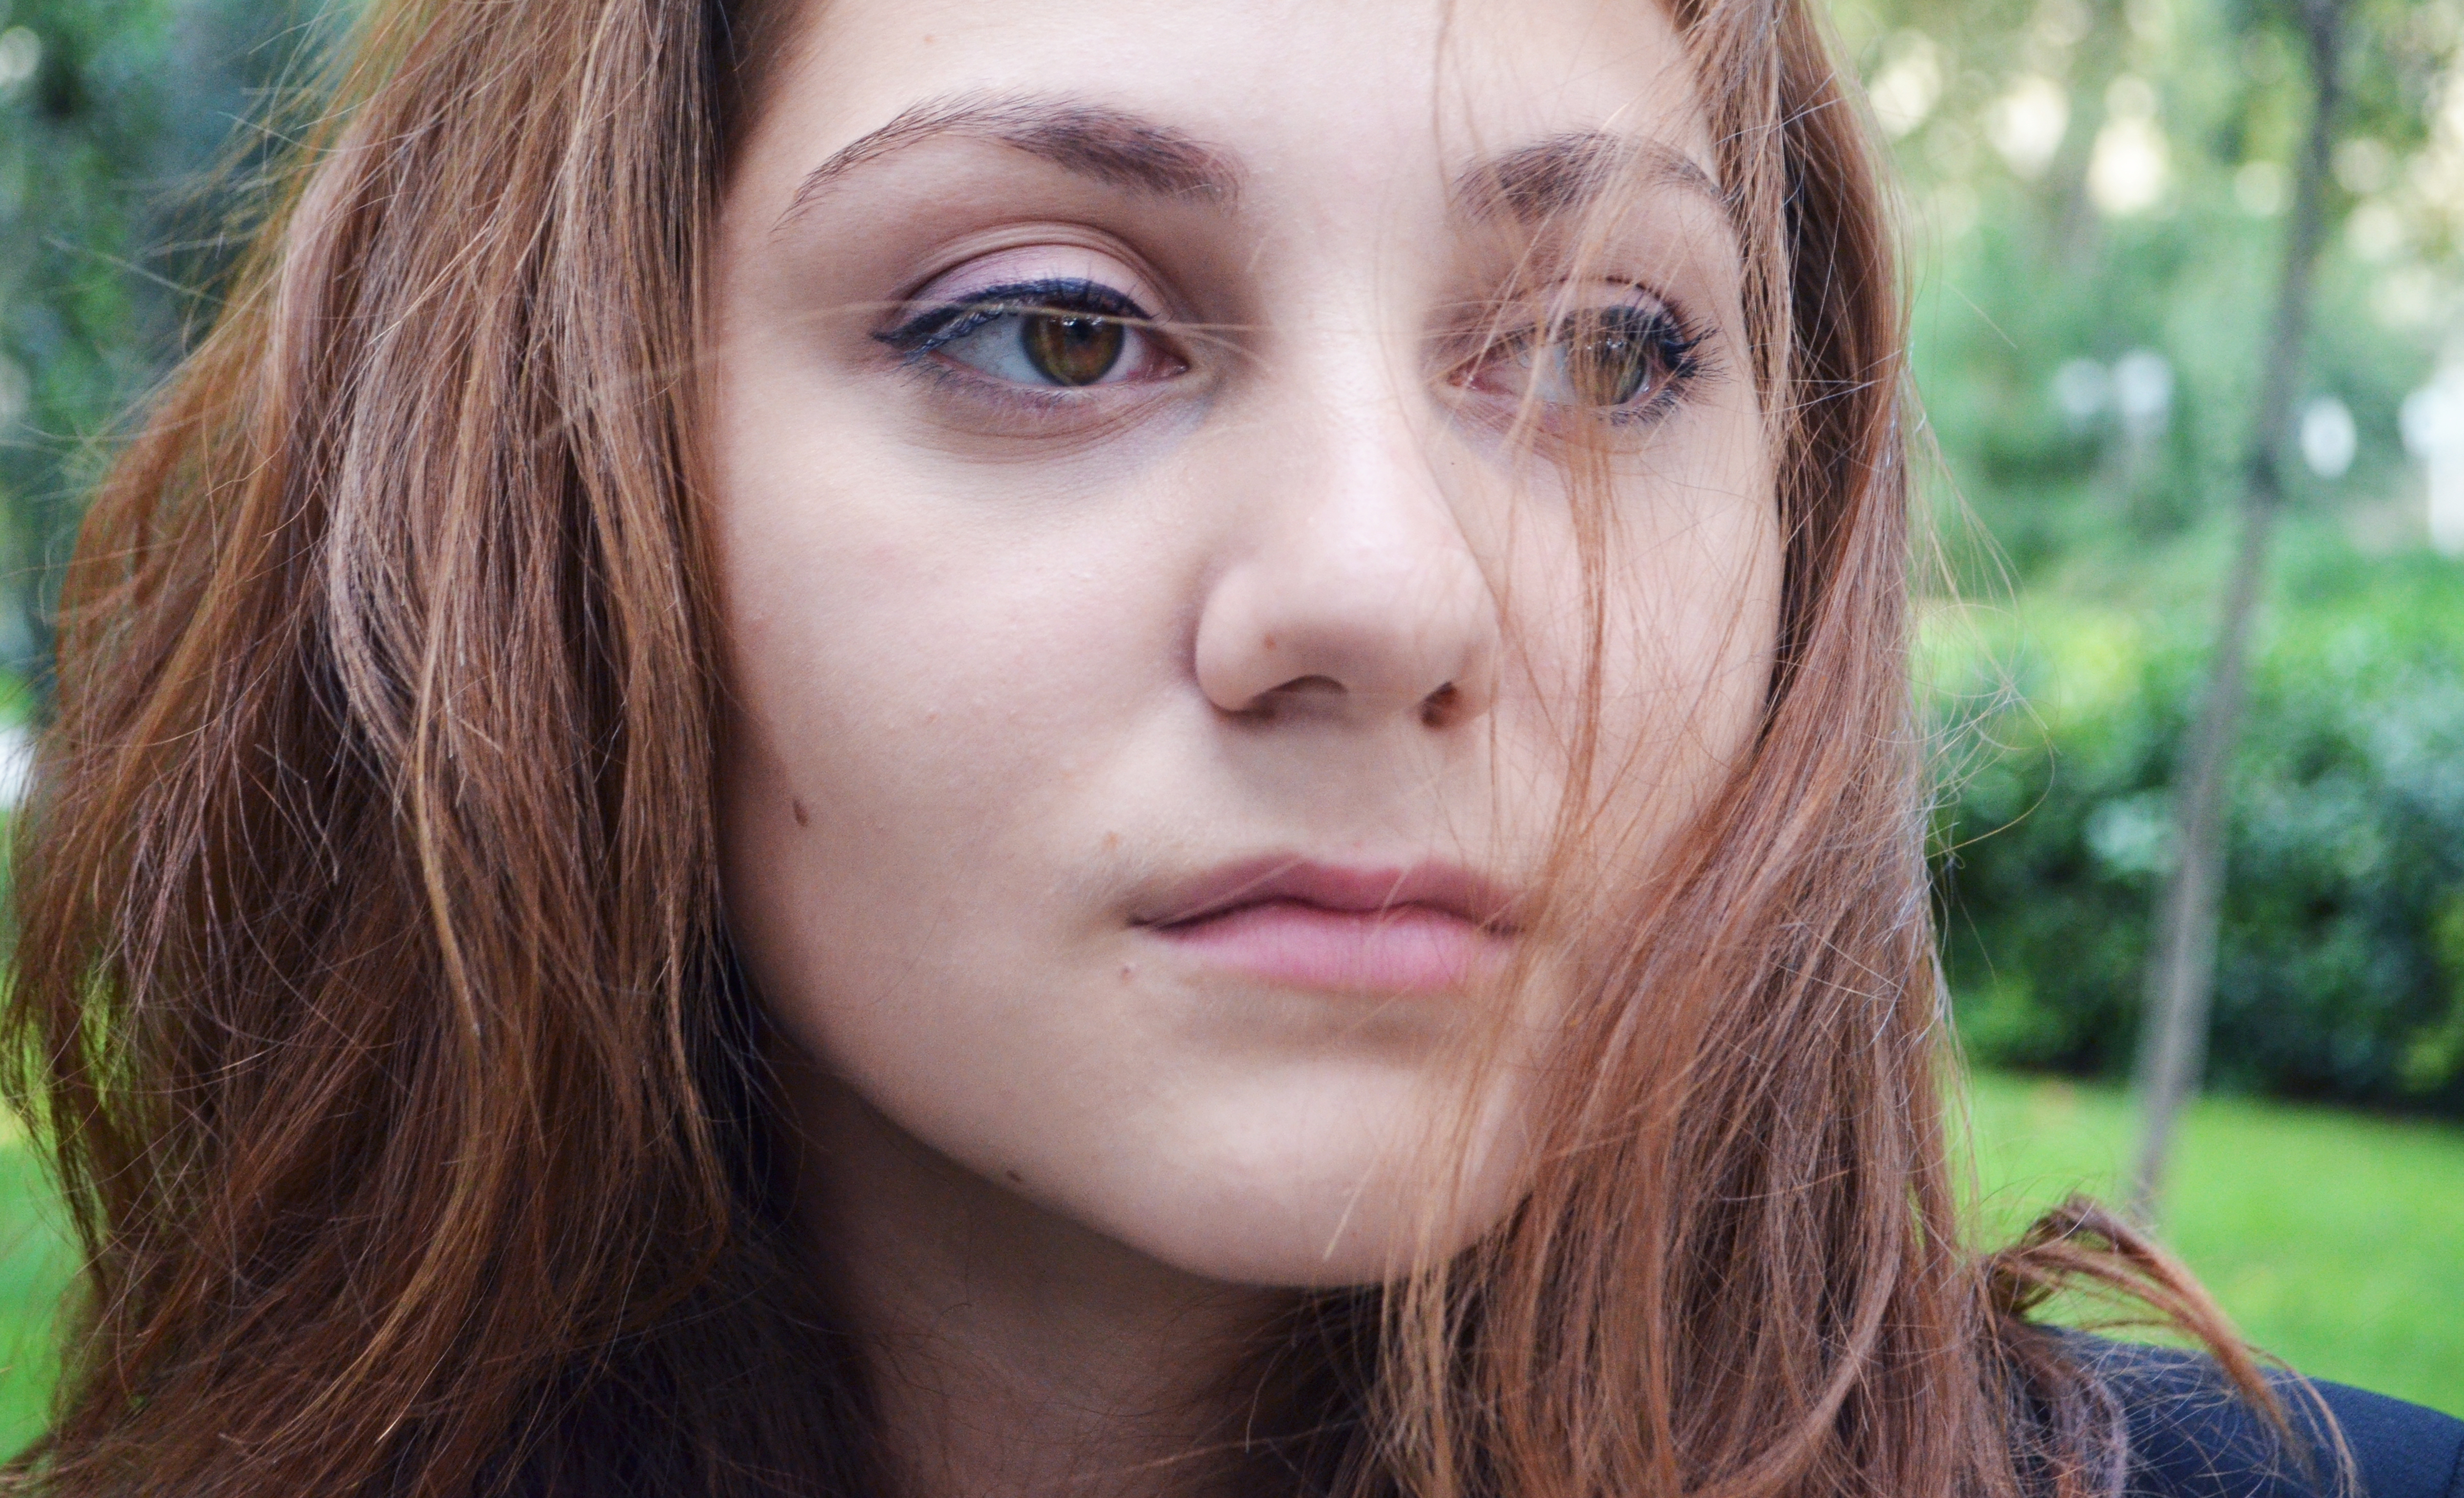 Close up portrait of a woman's face, taken outside in a park